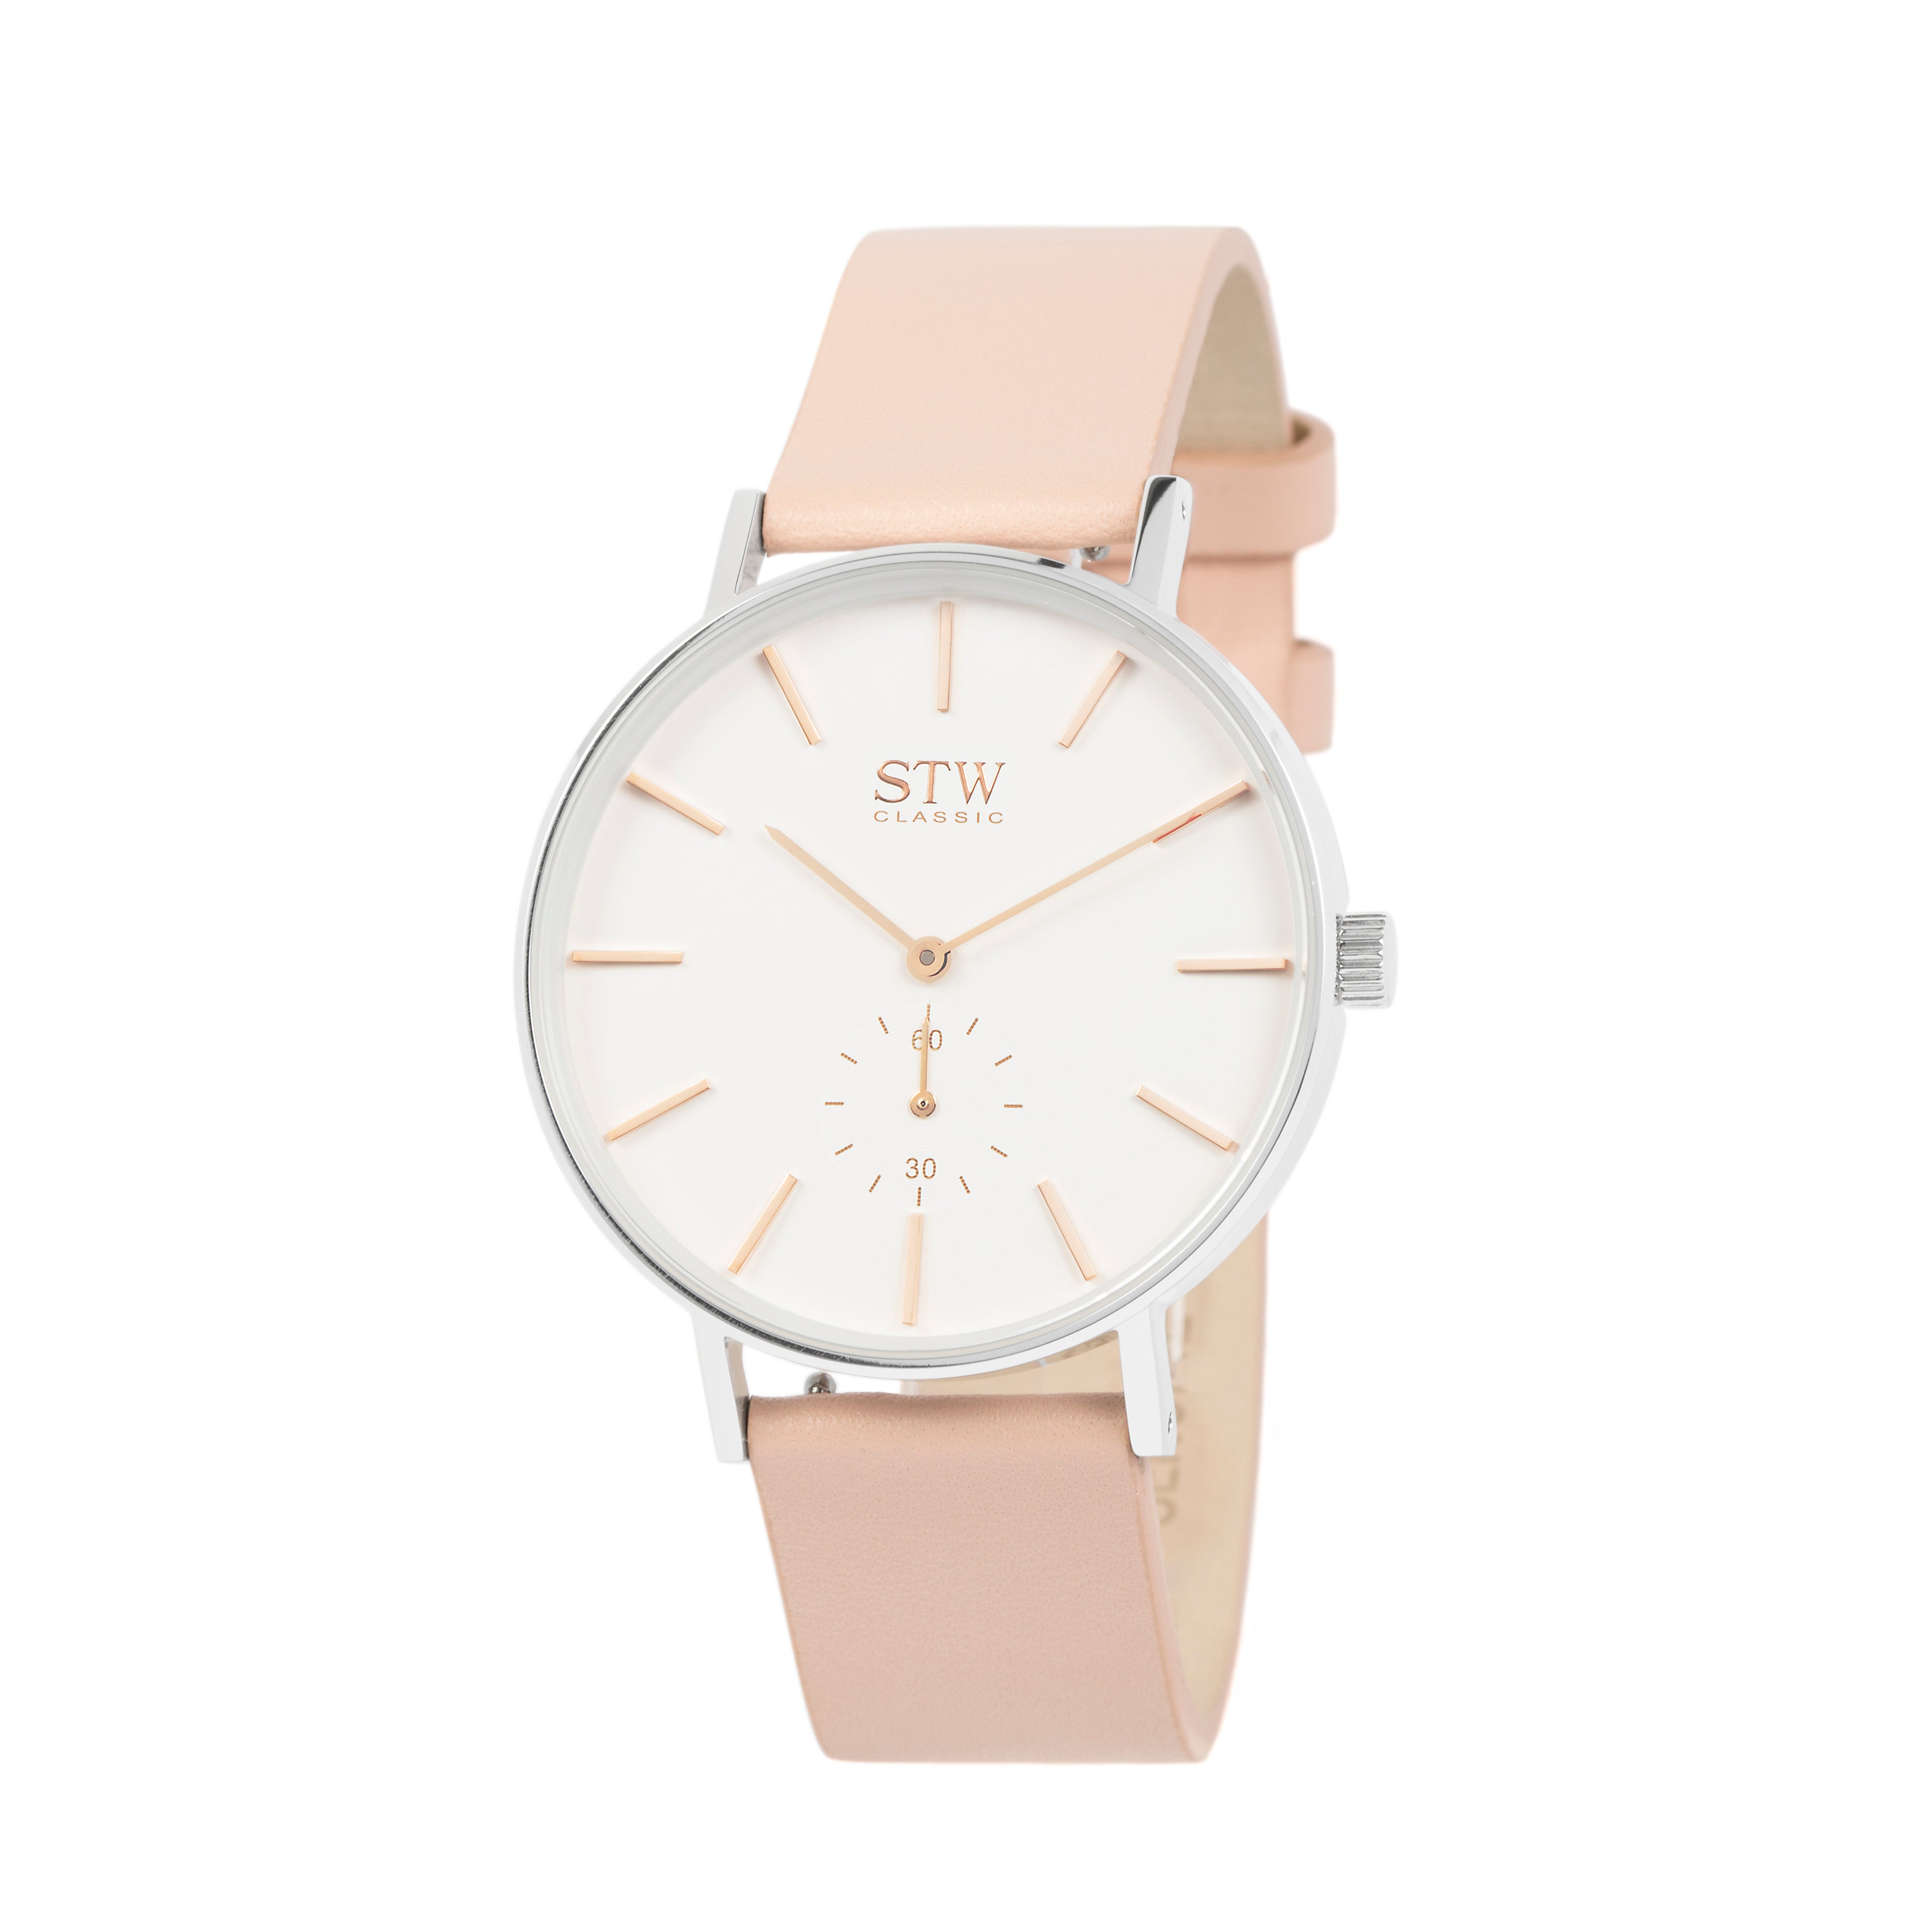 THE CLASSIC -  WHITE DIAL WITH VEGETABLE TAN LEATHER STRAP WATCH